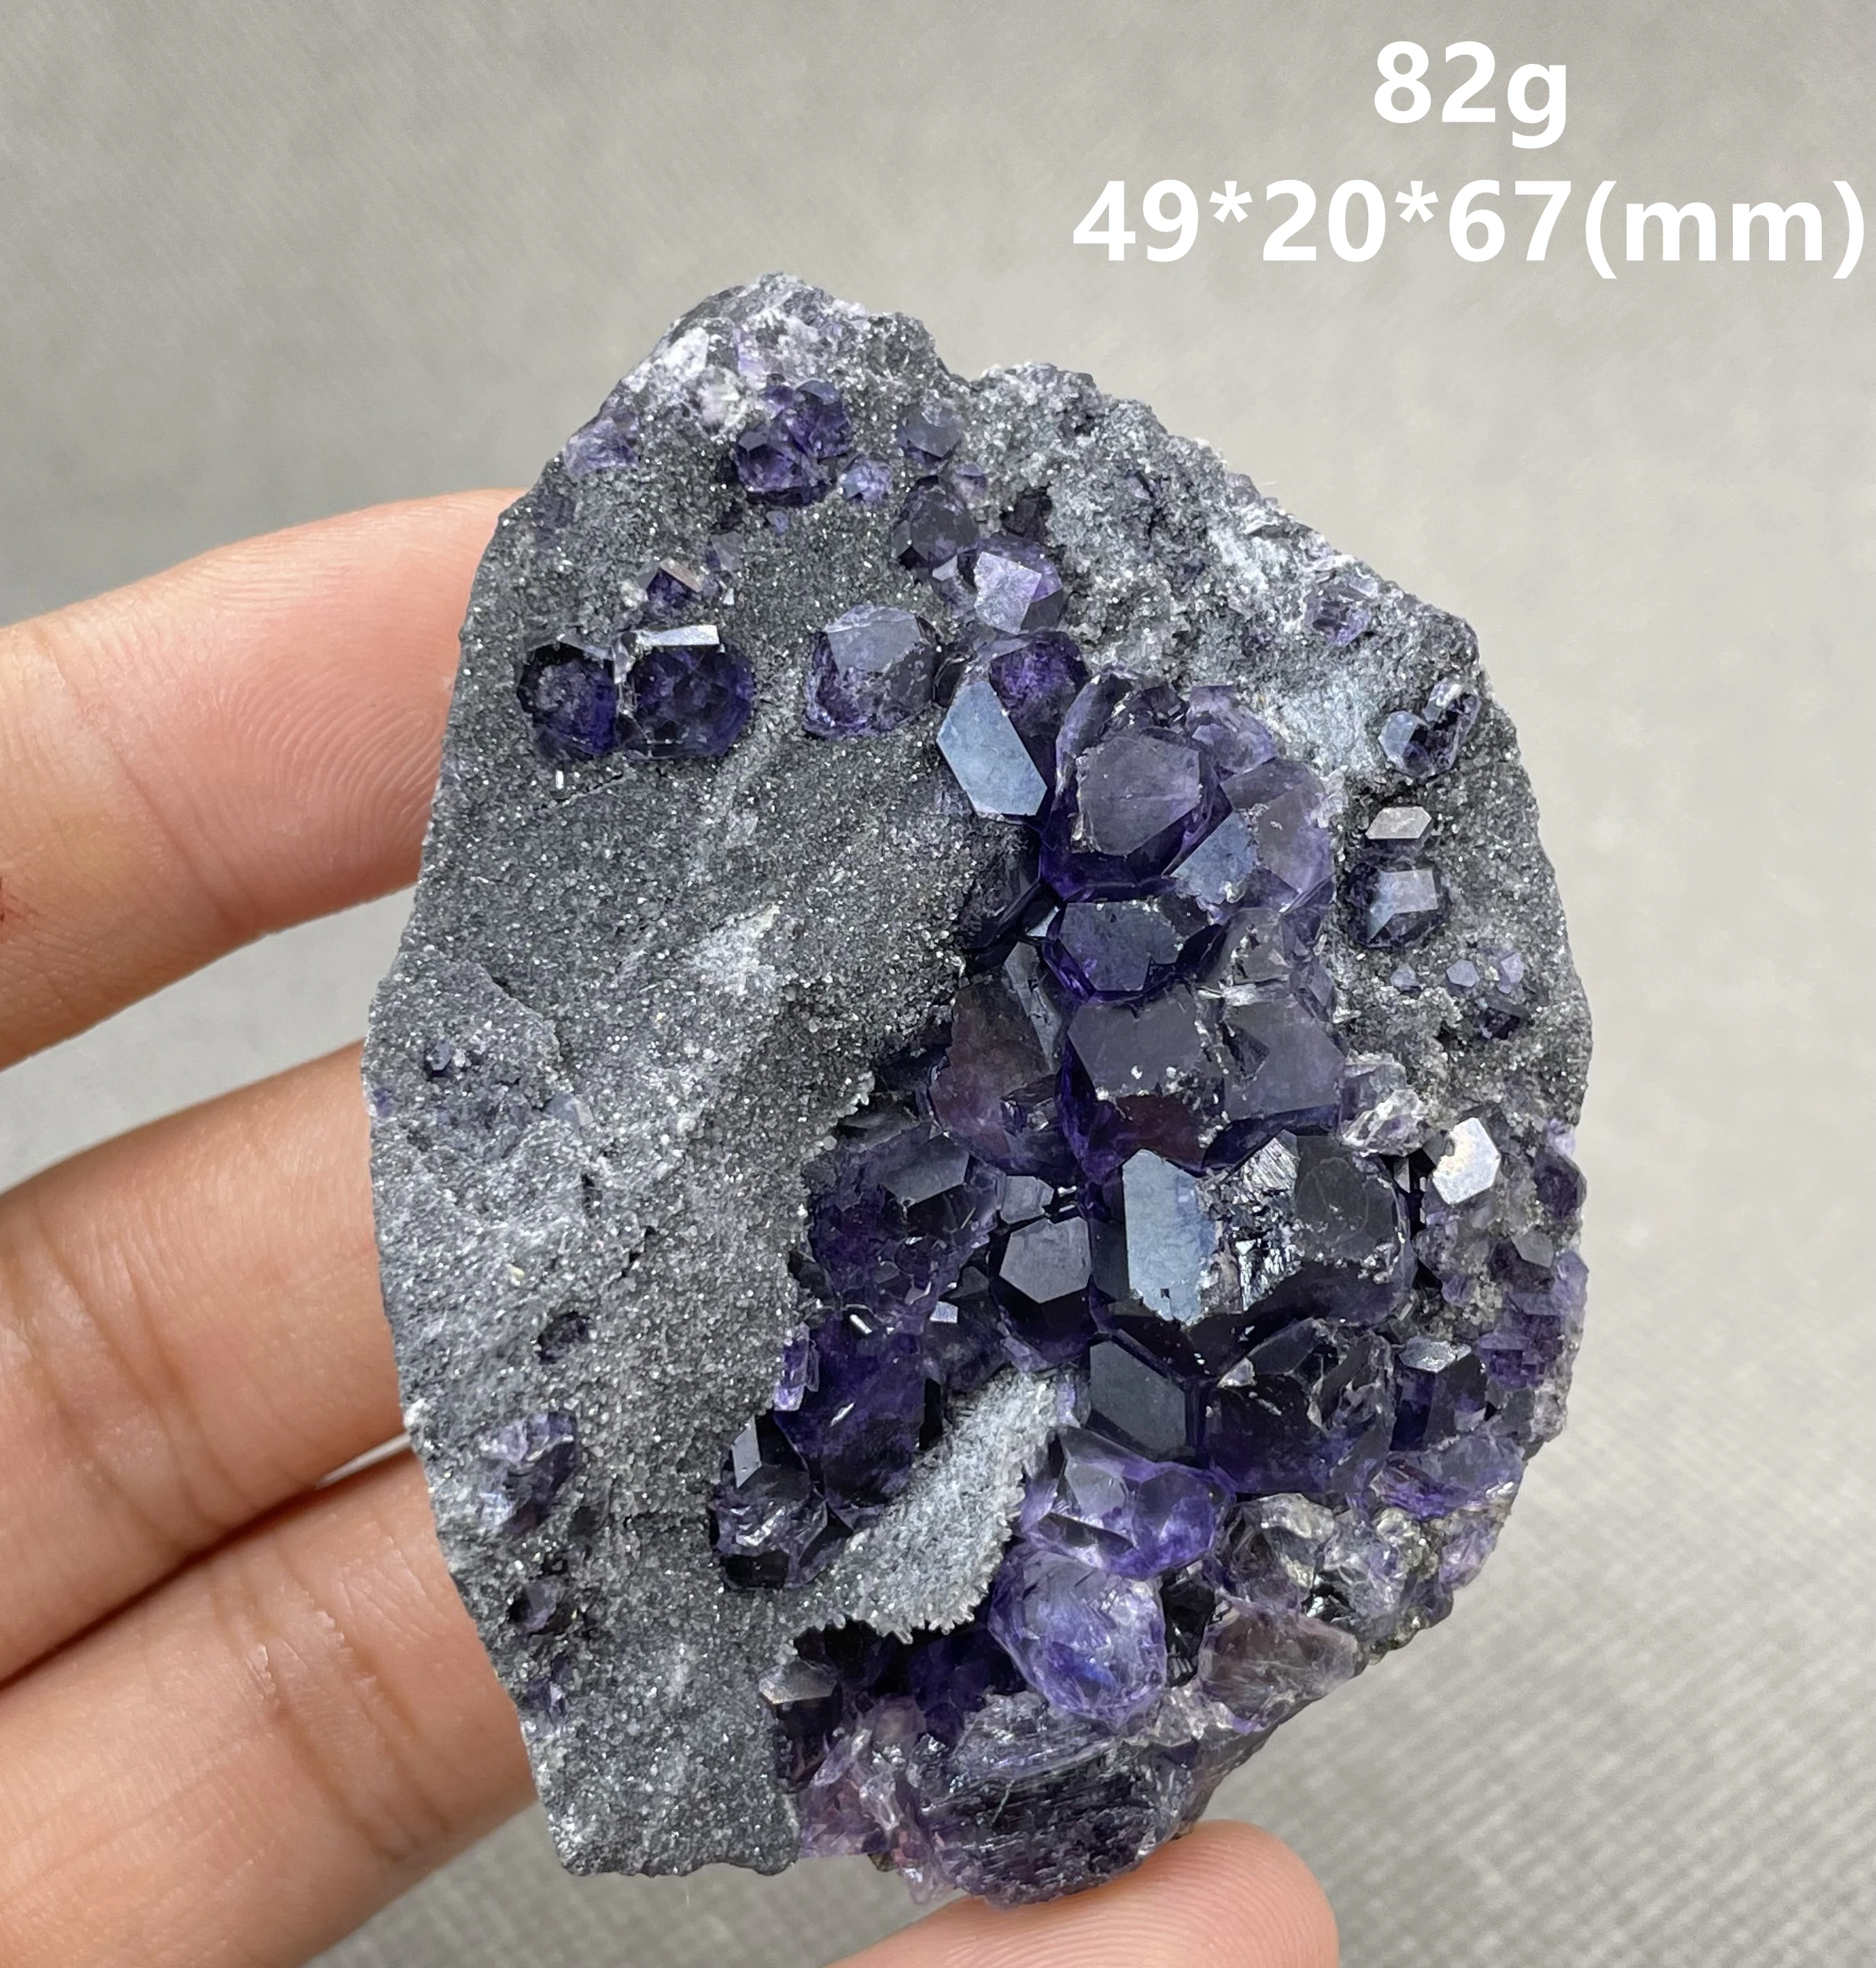 NEW! BEST! 100% Natural Polyhedral Tanzanite blue Purple fluorite cluster mineral specimens Gem level Stones and crystals